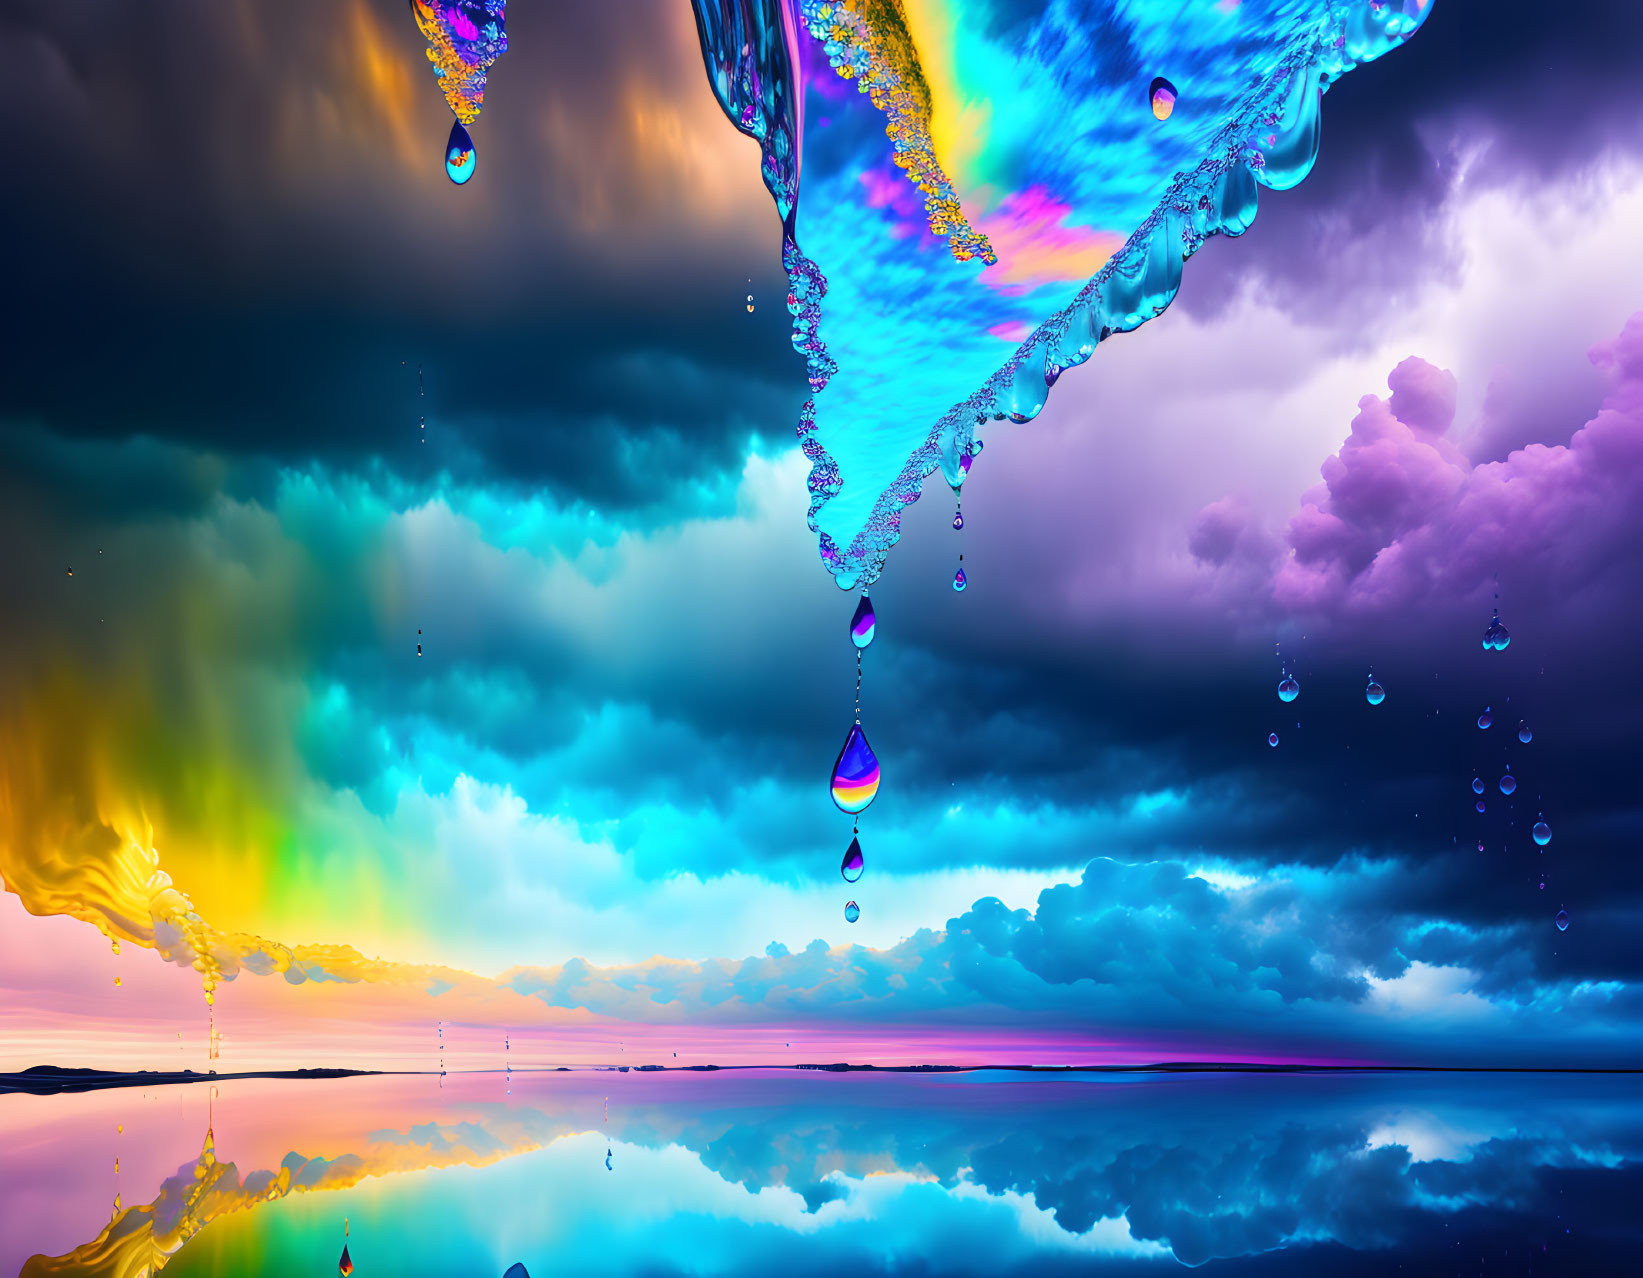 Colorful surreal landscape with melting sky and mirrored water surface